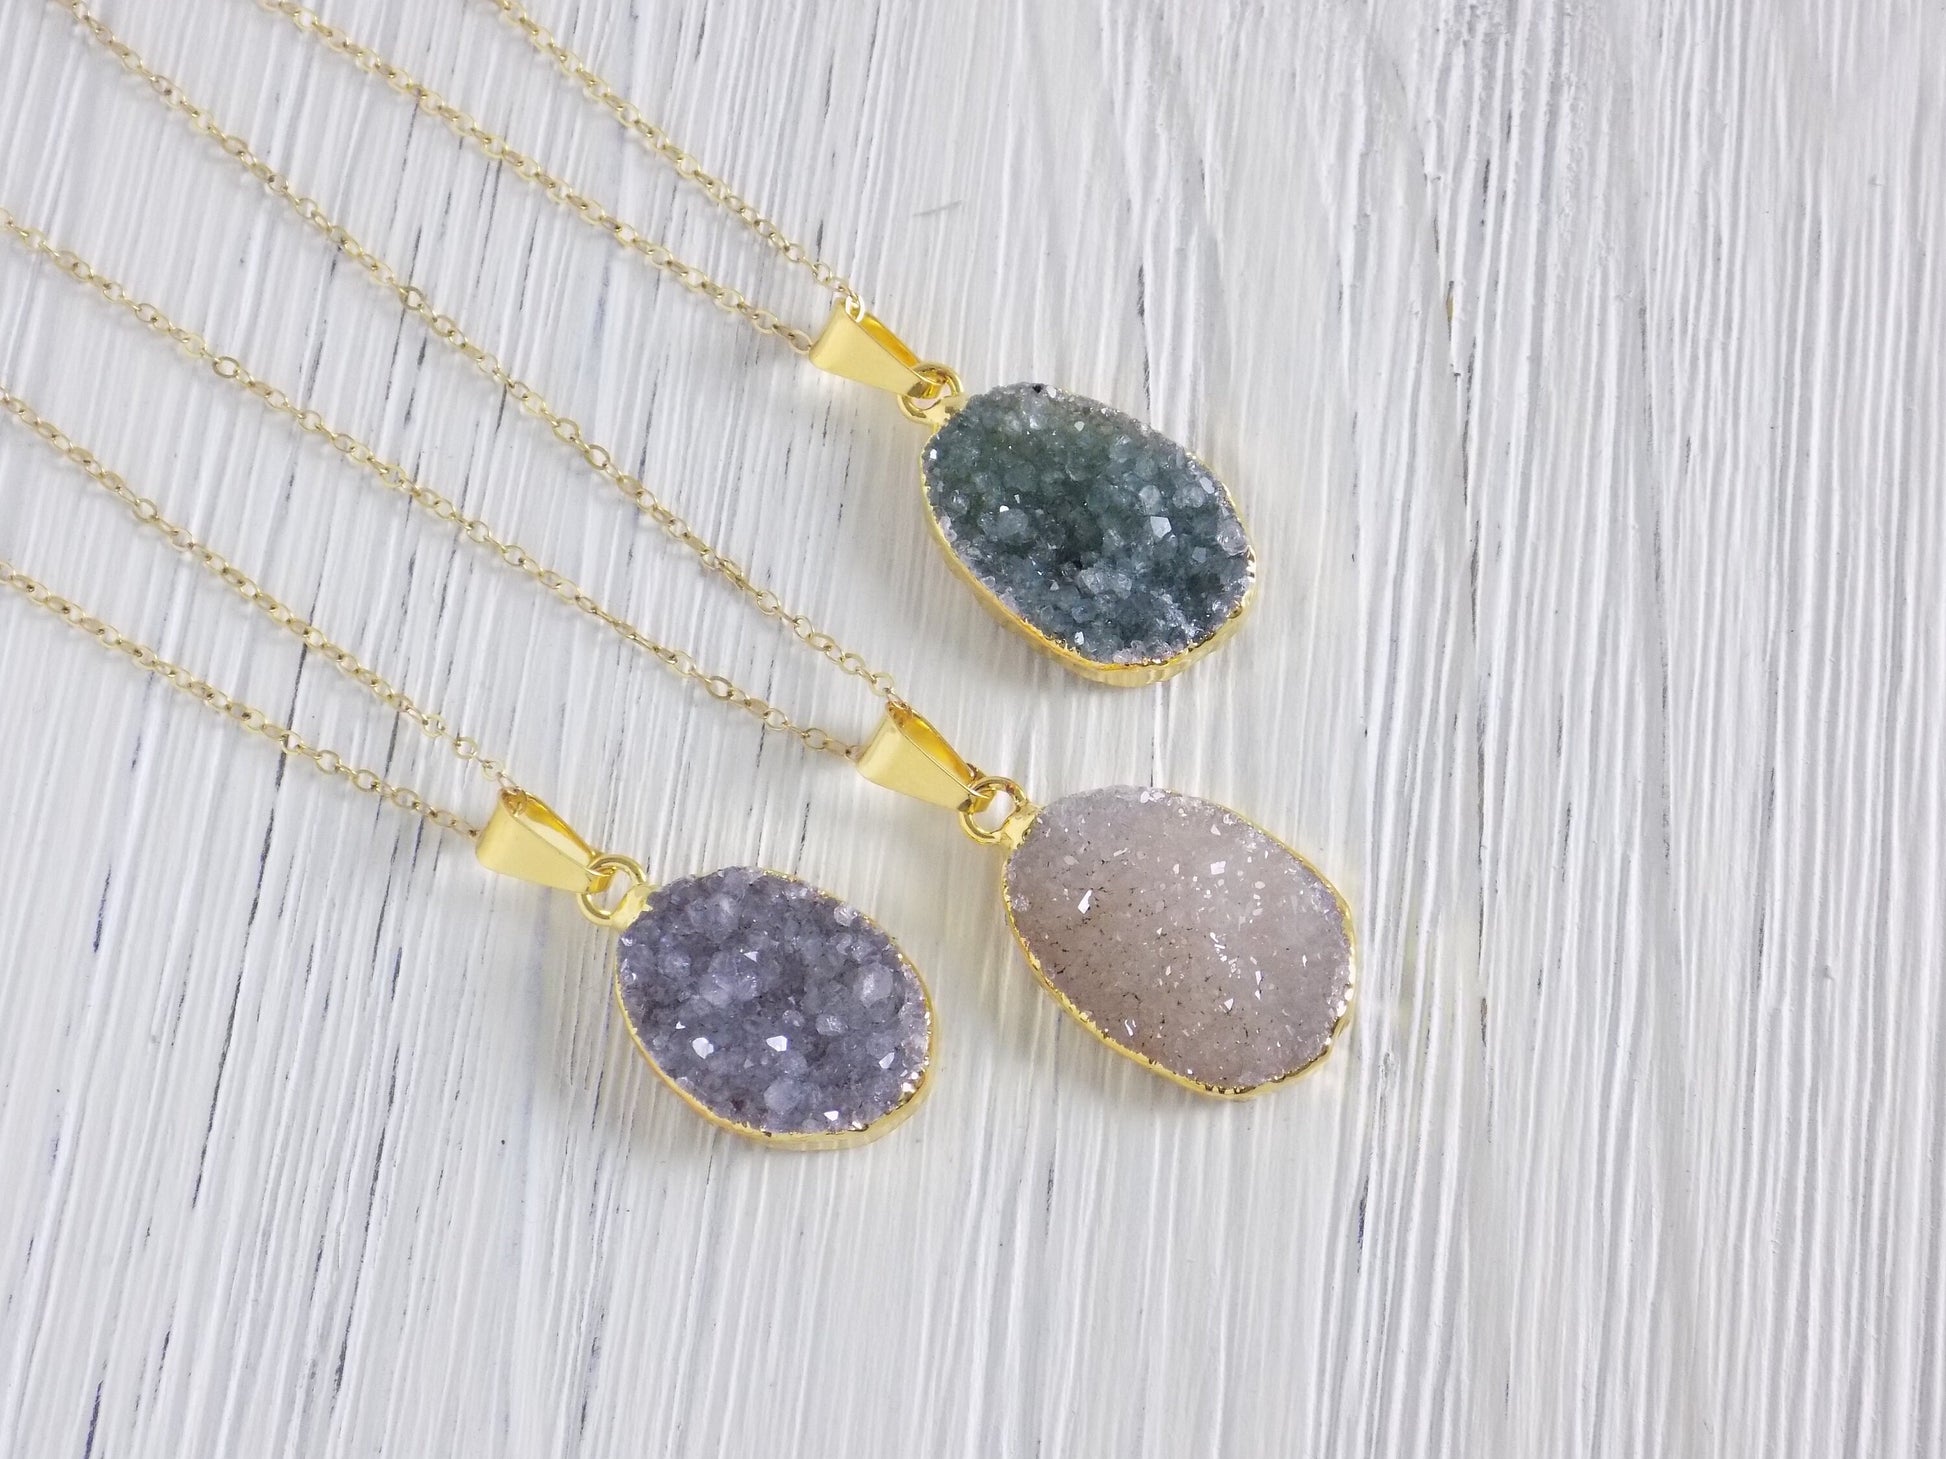 Personalized Druzy Necklace Gold Fill Chain - Drusy Pendant Necklaces For Women